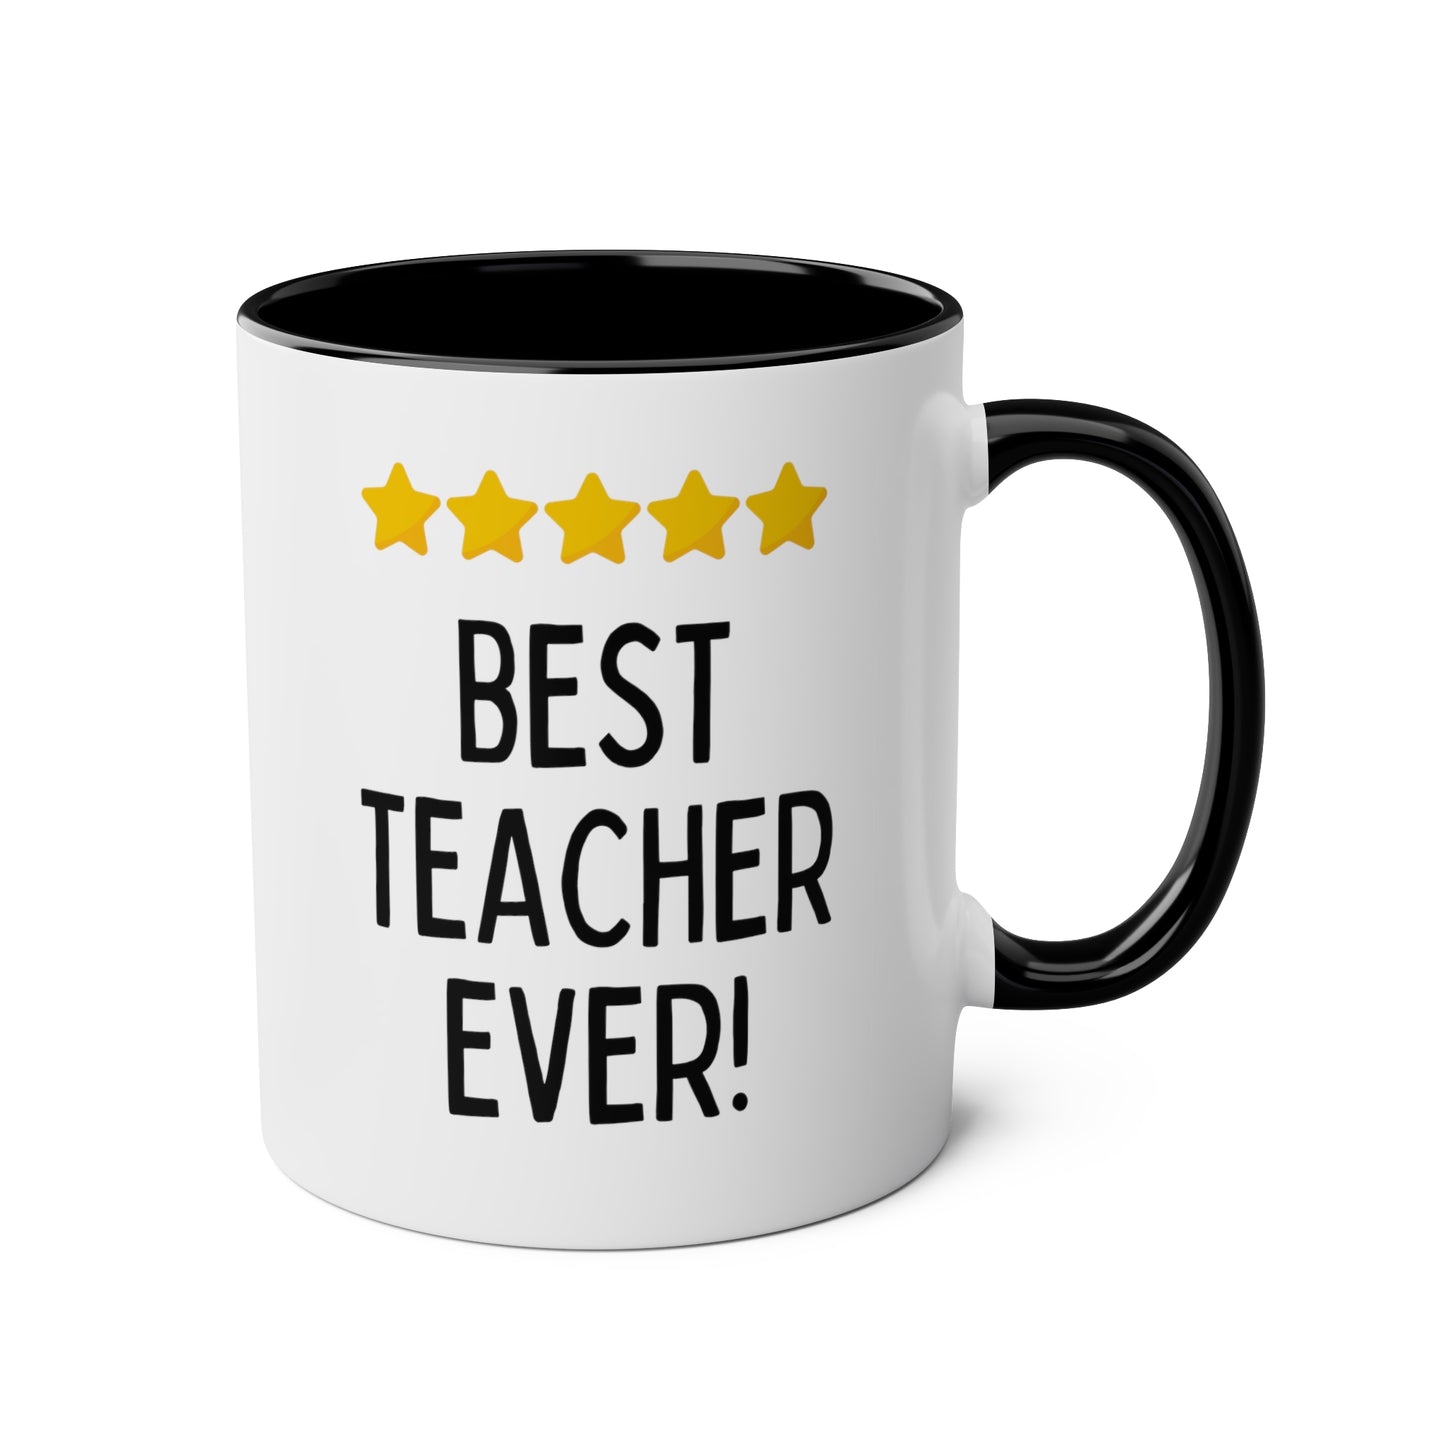 Best Teacher Ever 11oz white with black accent funny large coffee mug gift for educator teaching assistant end of the year present professor tutor five stars waveywares wavey wares wavywares wavy wares